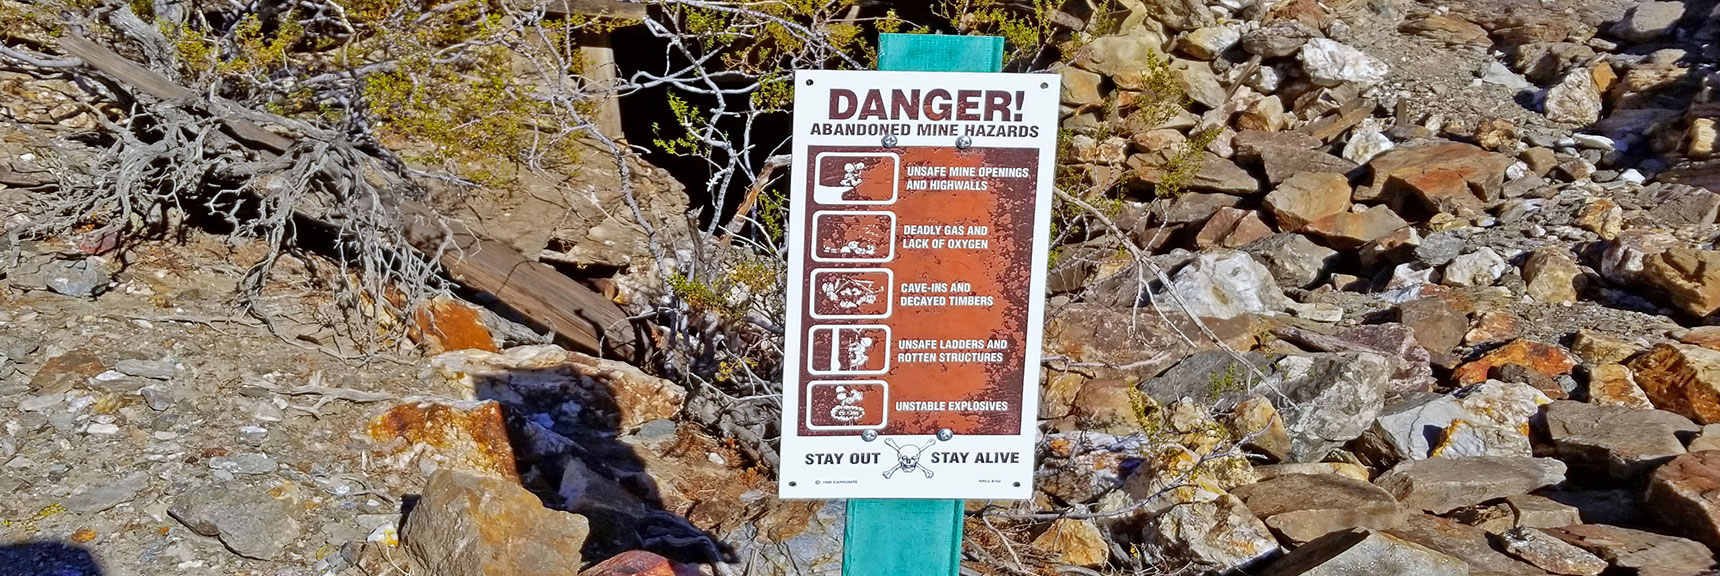 These Warning Signs Posted at Many Mine Openings | Keane Wonder Mine | Death Valley National Park, California